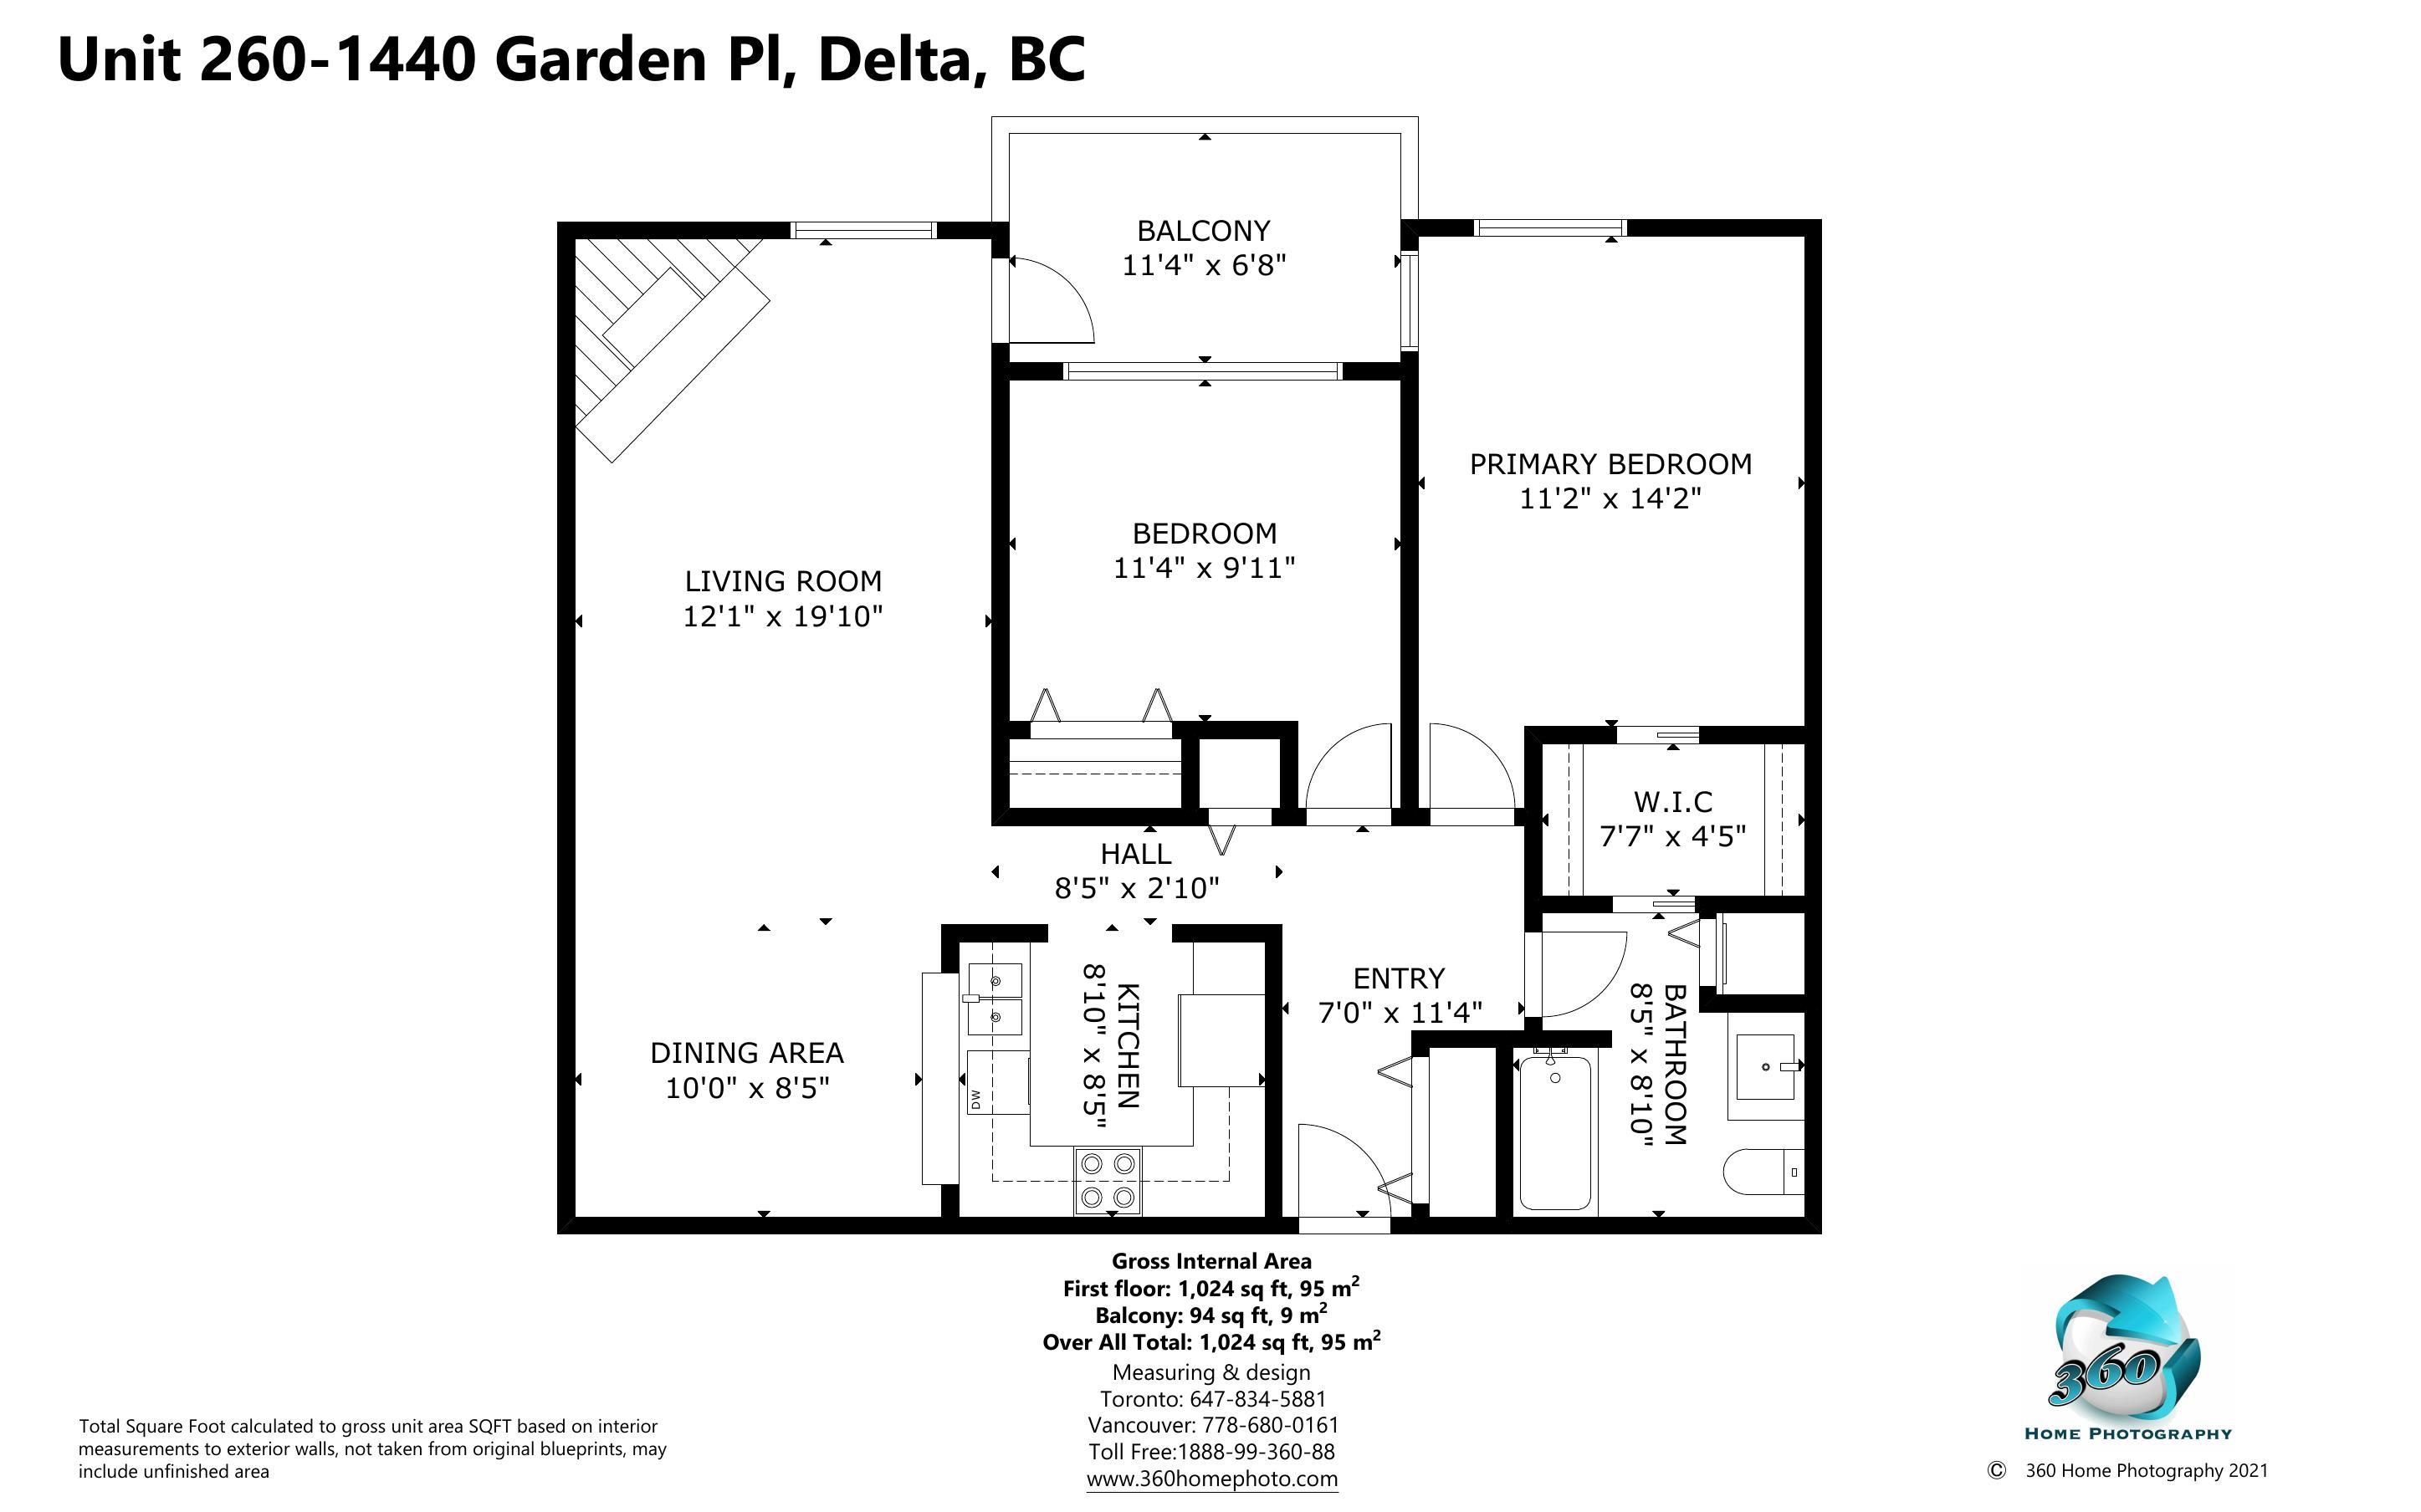 Listing image of 260 1440 GARDEN PLACE